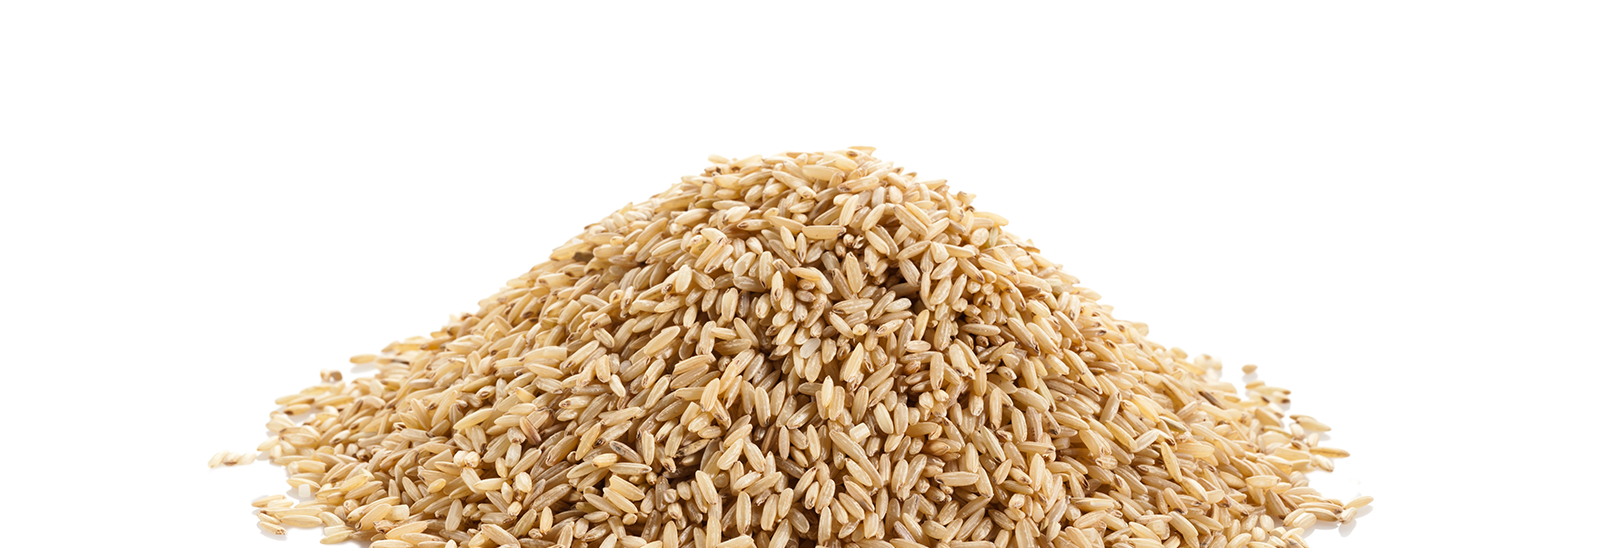 Photo of a pile of rice.